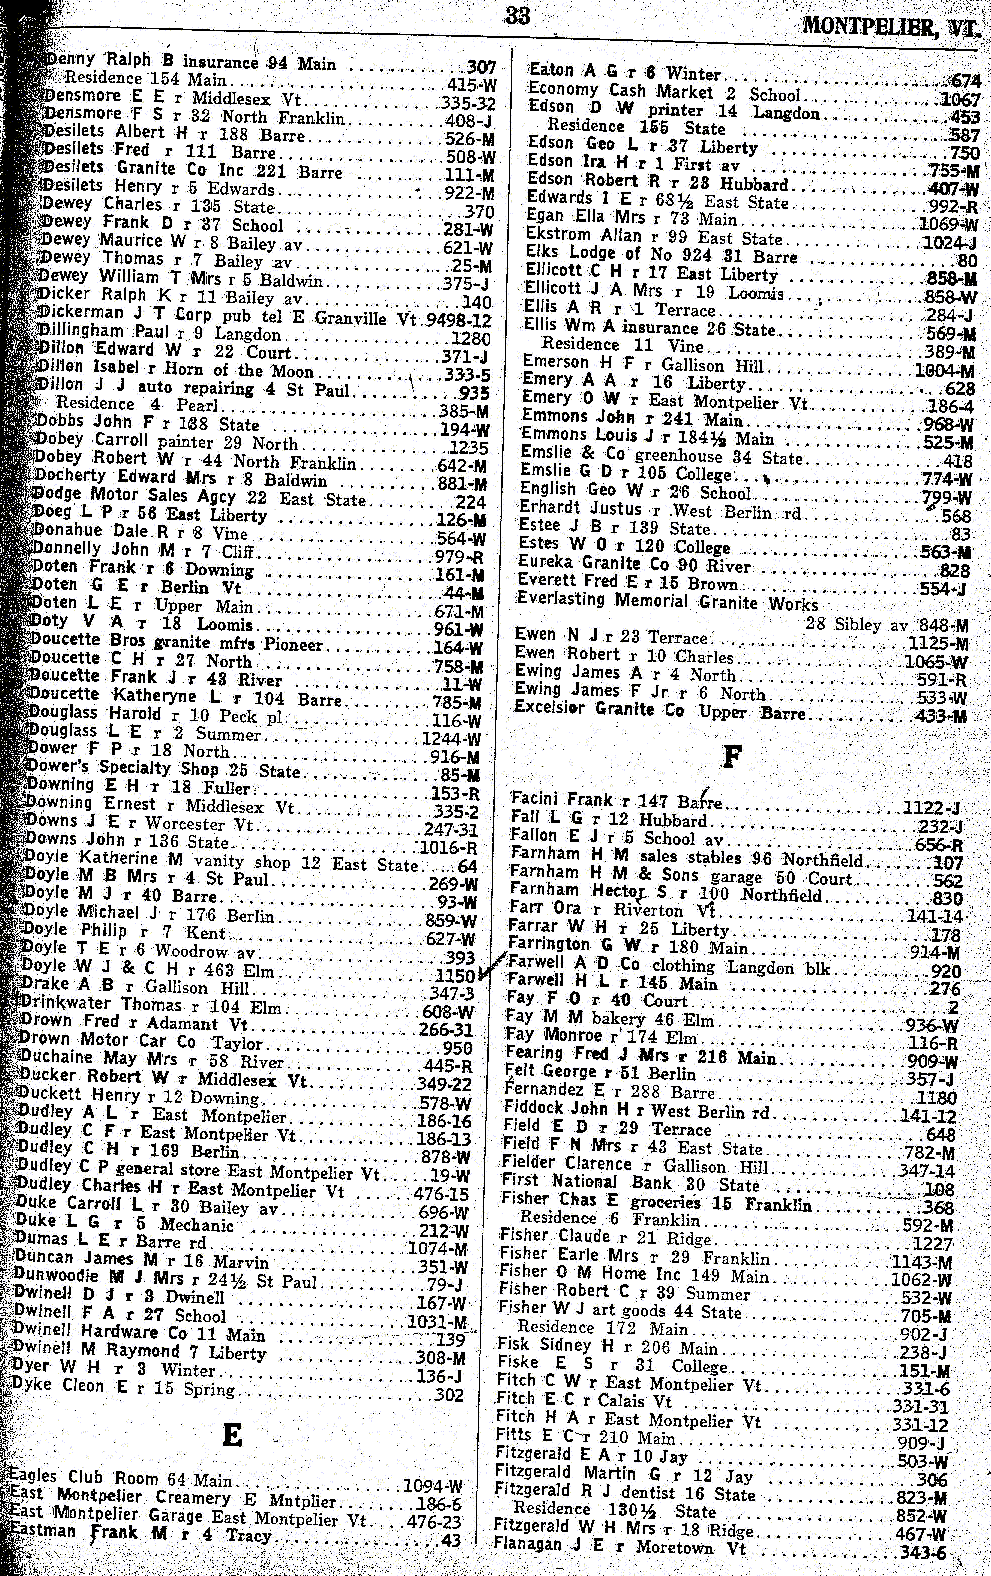 1928 Montpelier Vt Telephone Book - Page 33